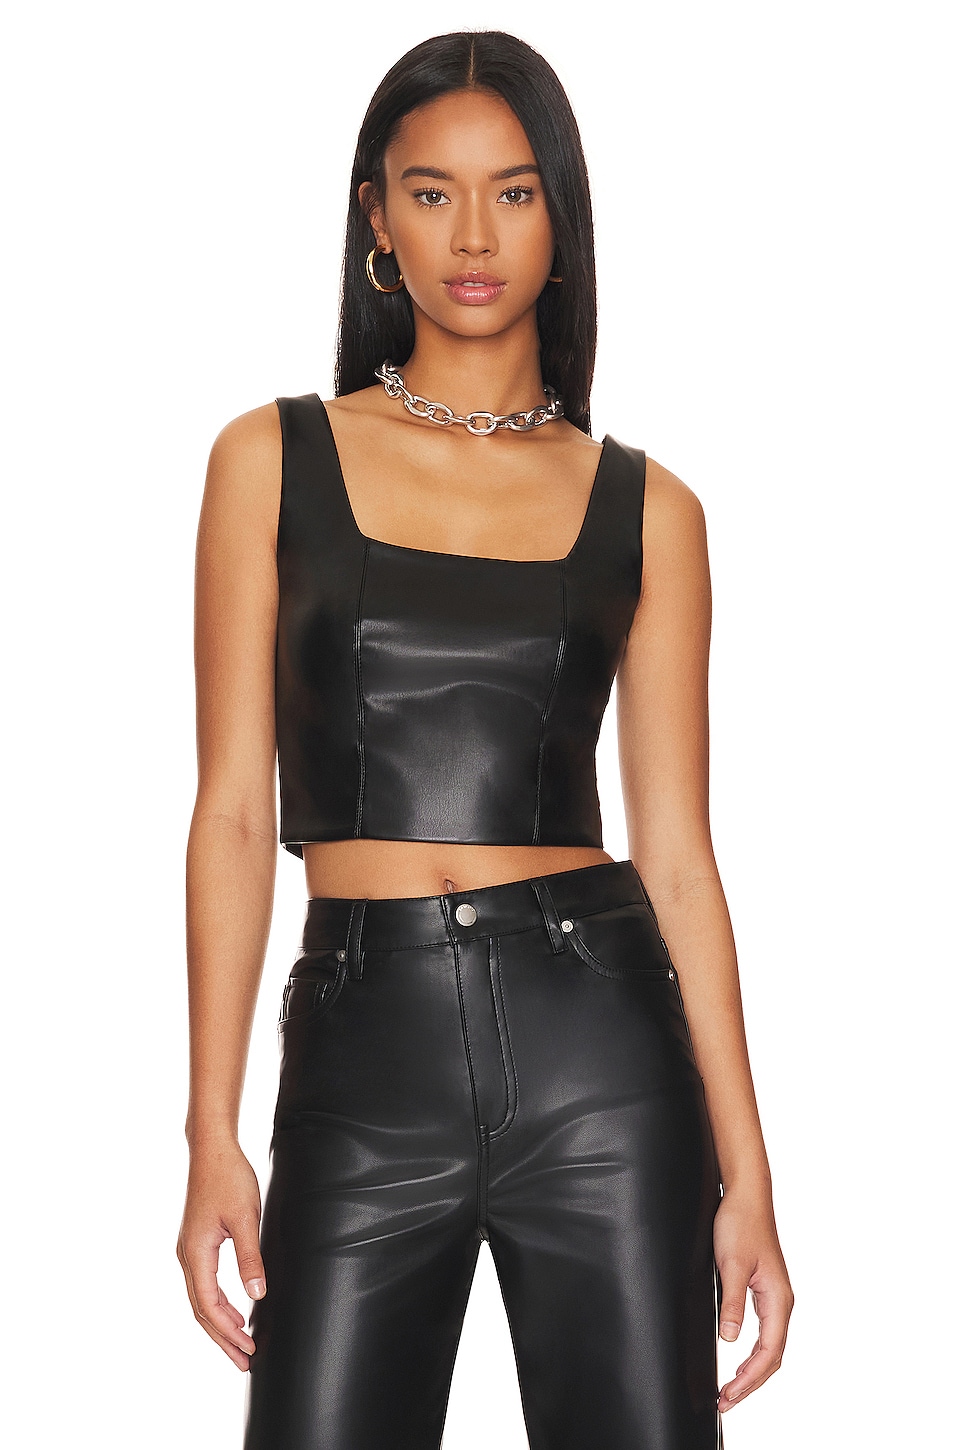 LBLC The Label Benny Faux Leather Bustier in Black